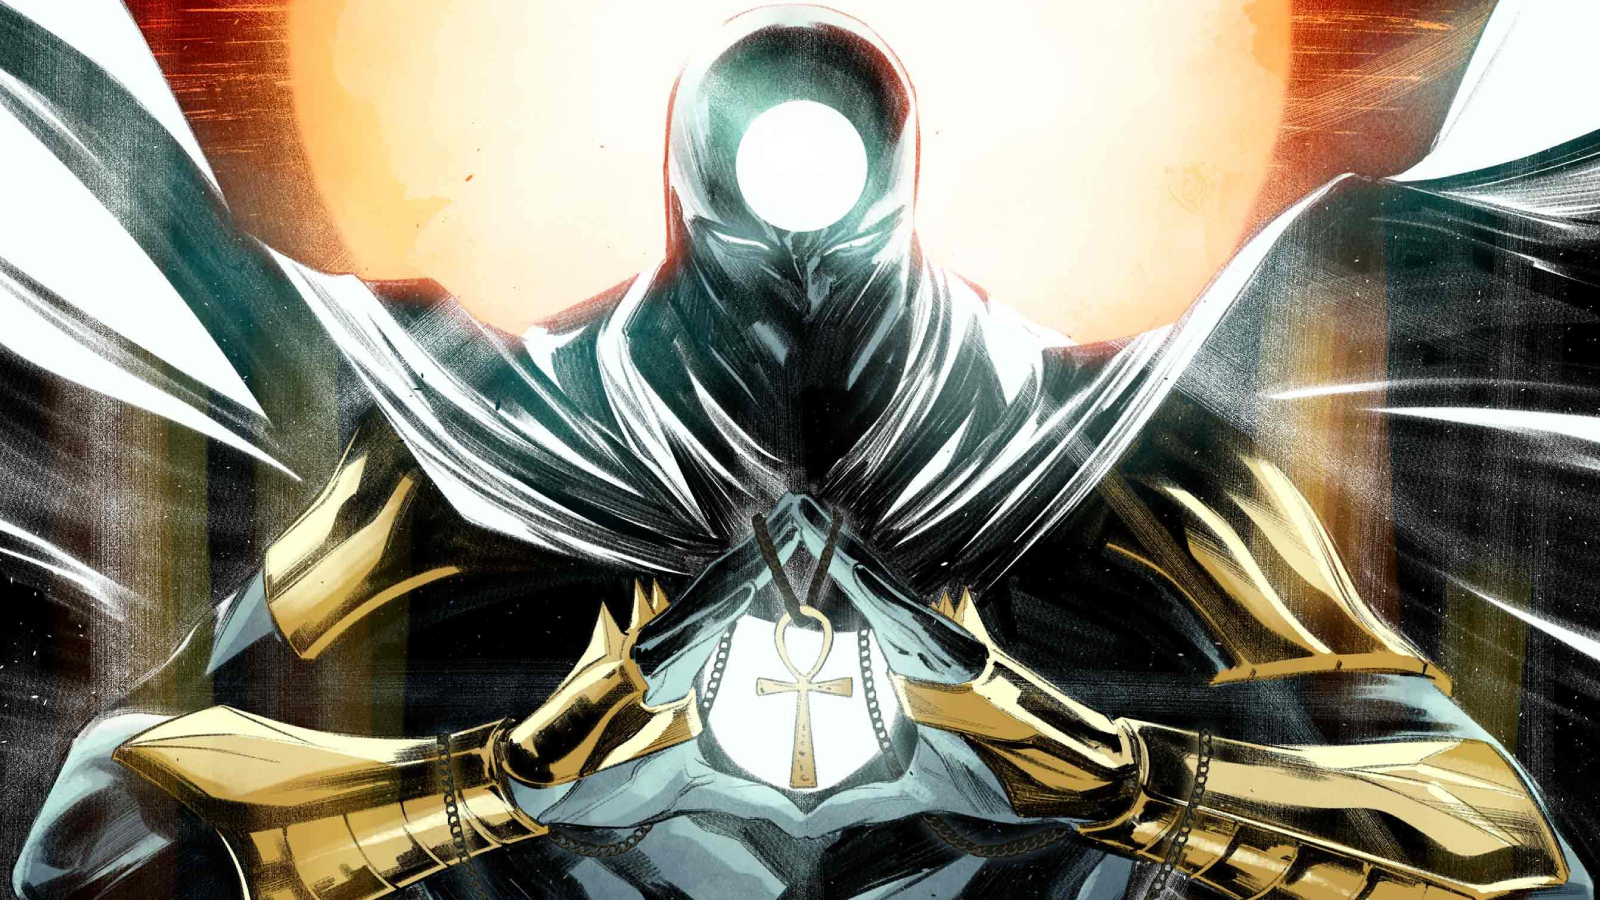 Meet the new Moon Knight who will replace Marc Spector